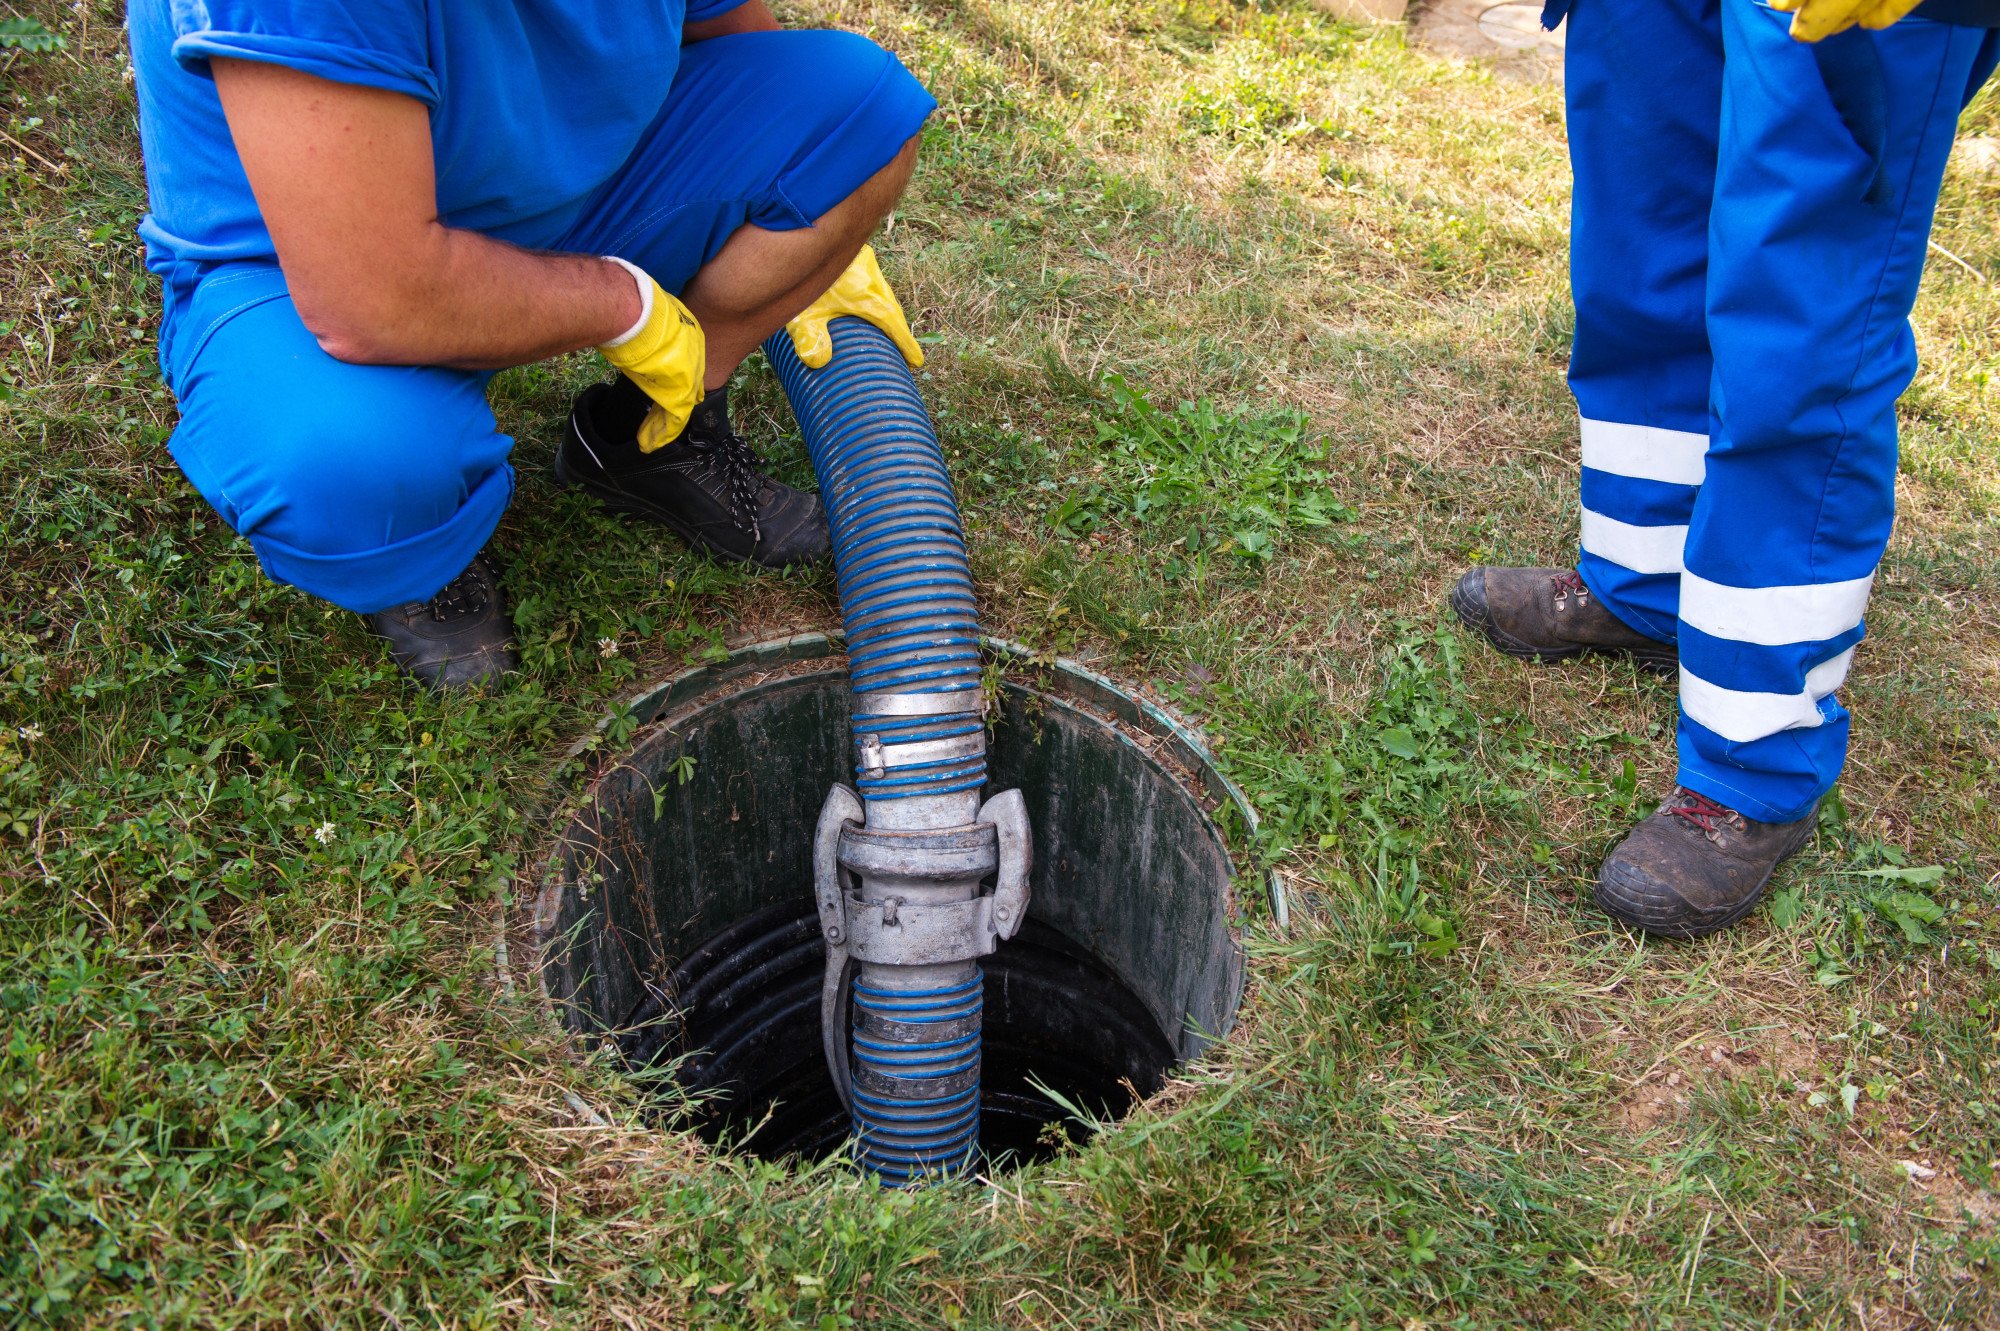 When it comes to emergency septic tank pumping, you should know the prices you can expect to pay. This guide has you covered.